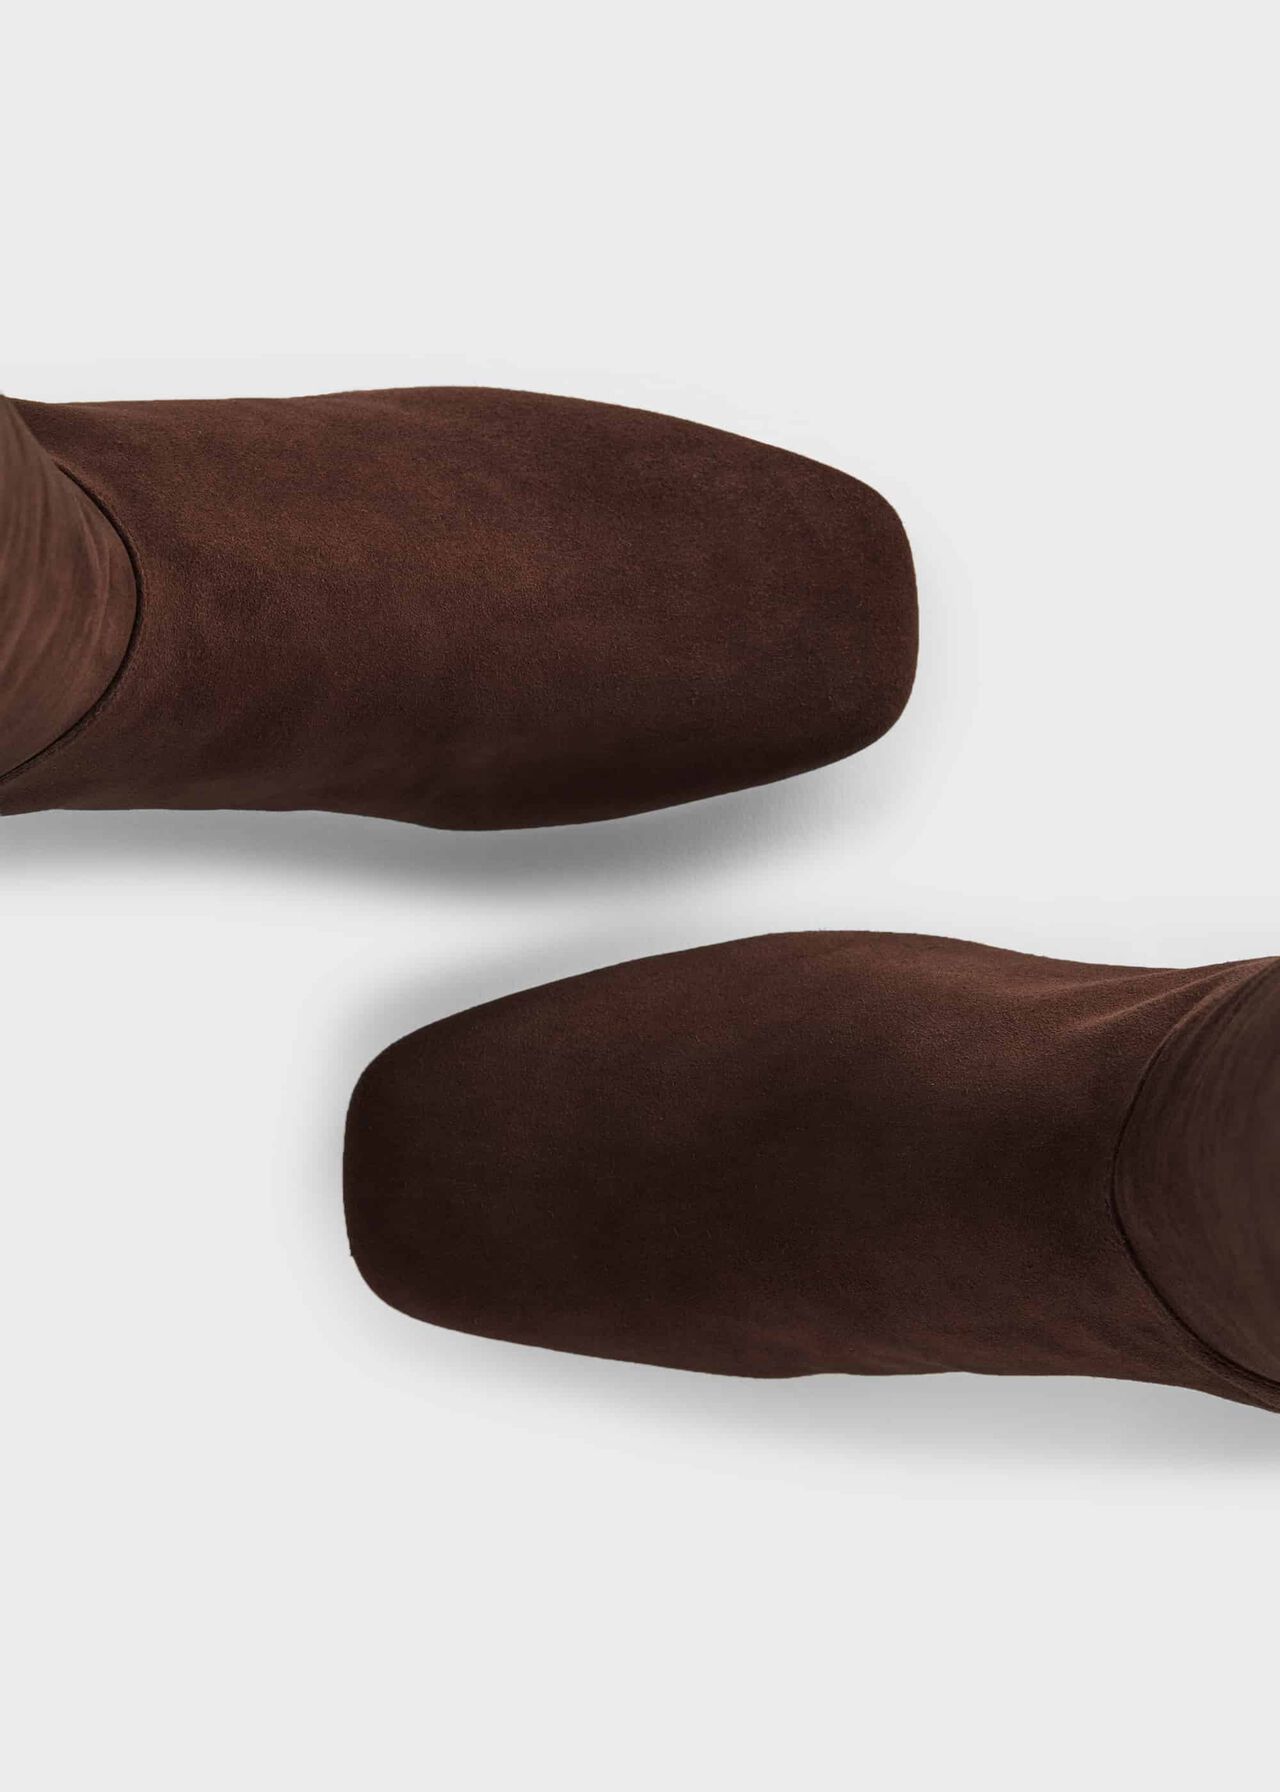 Hailey Flexi Knee Boots, Chocolate, hi-res